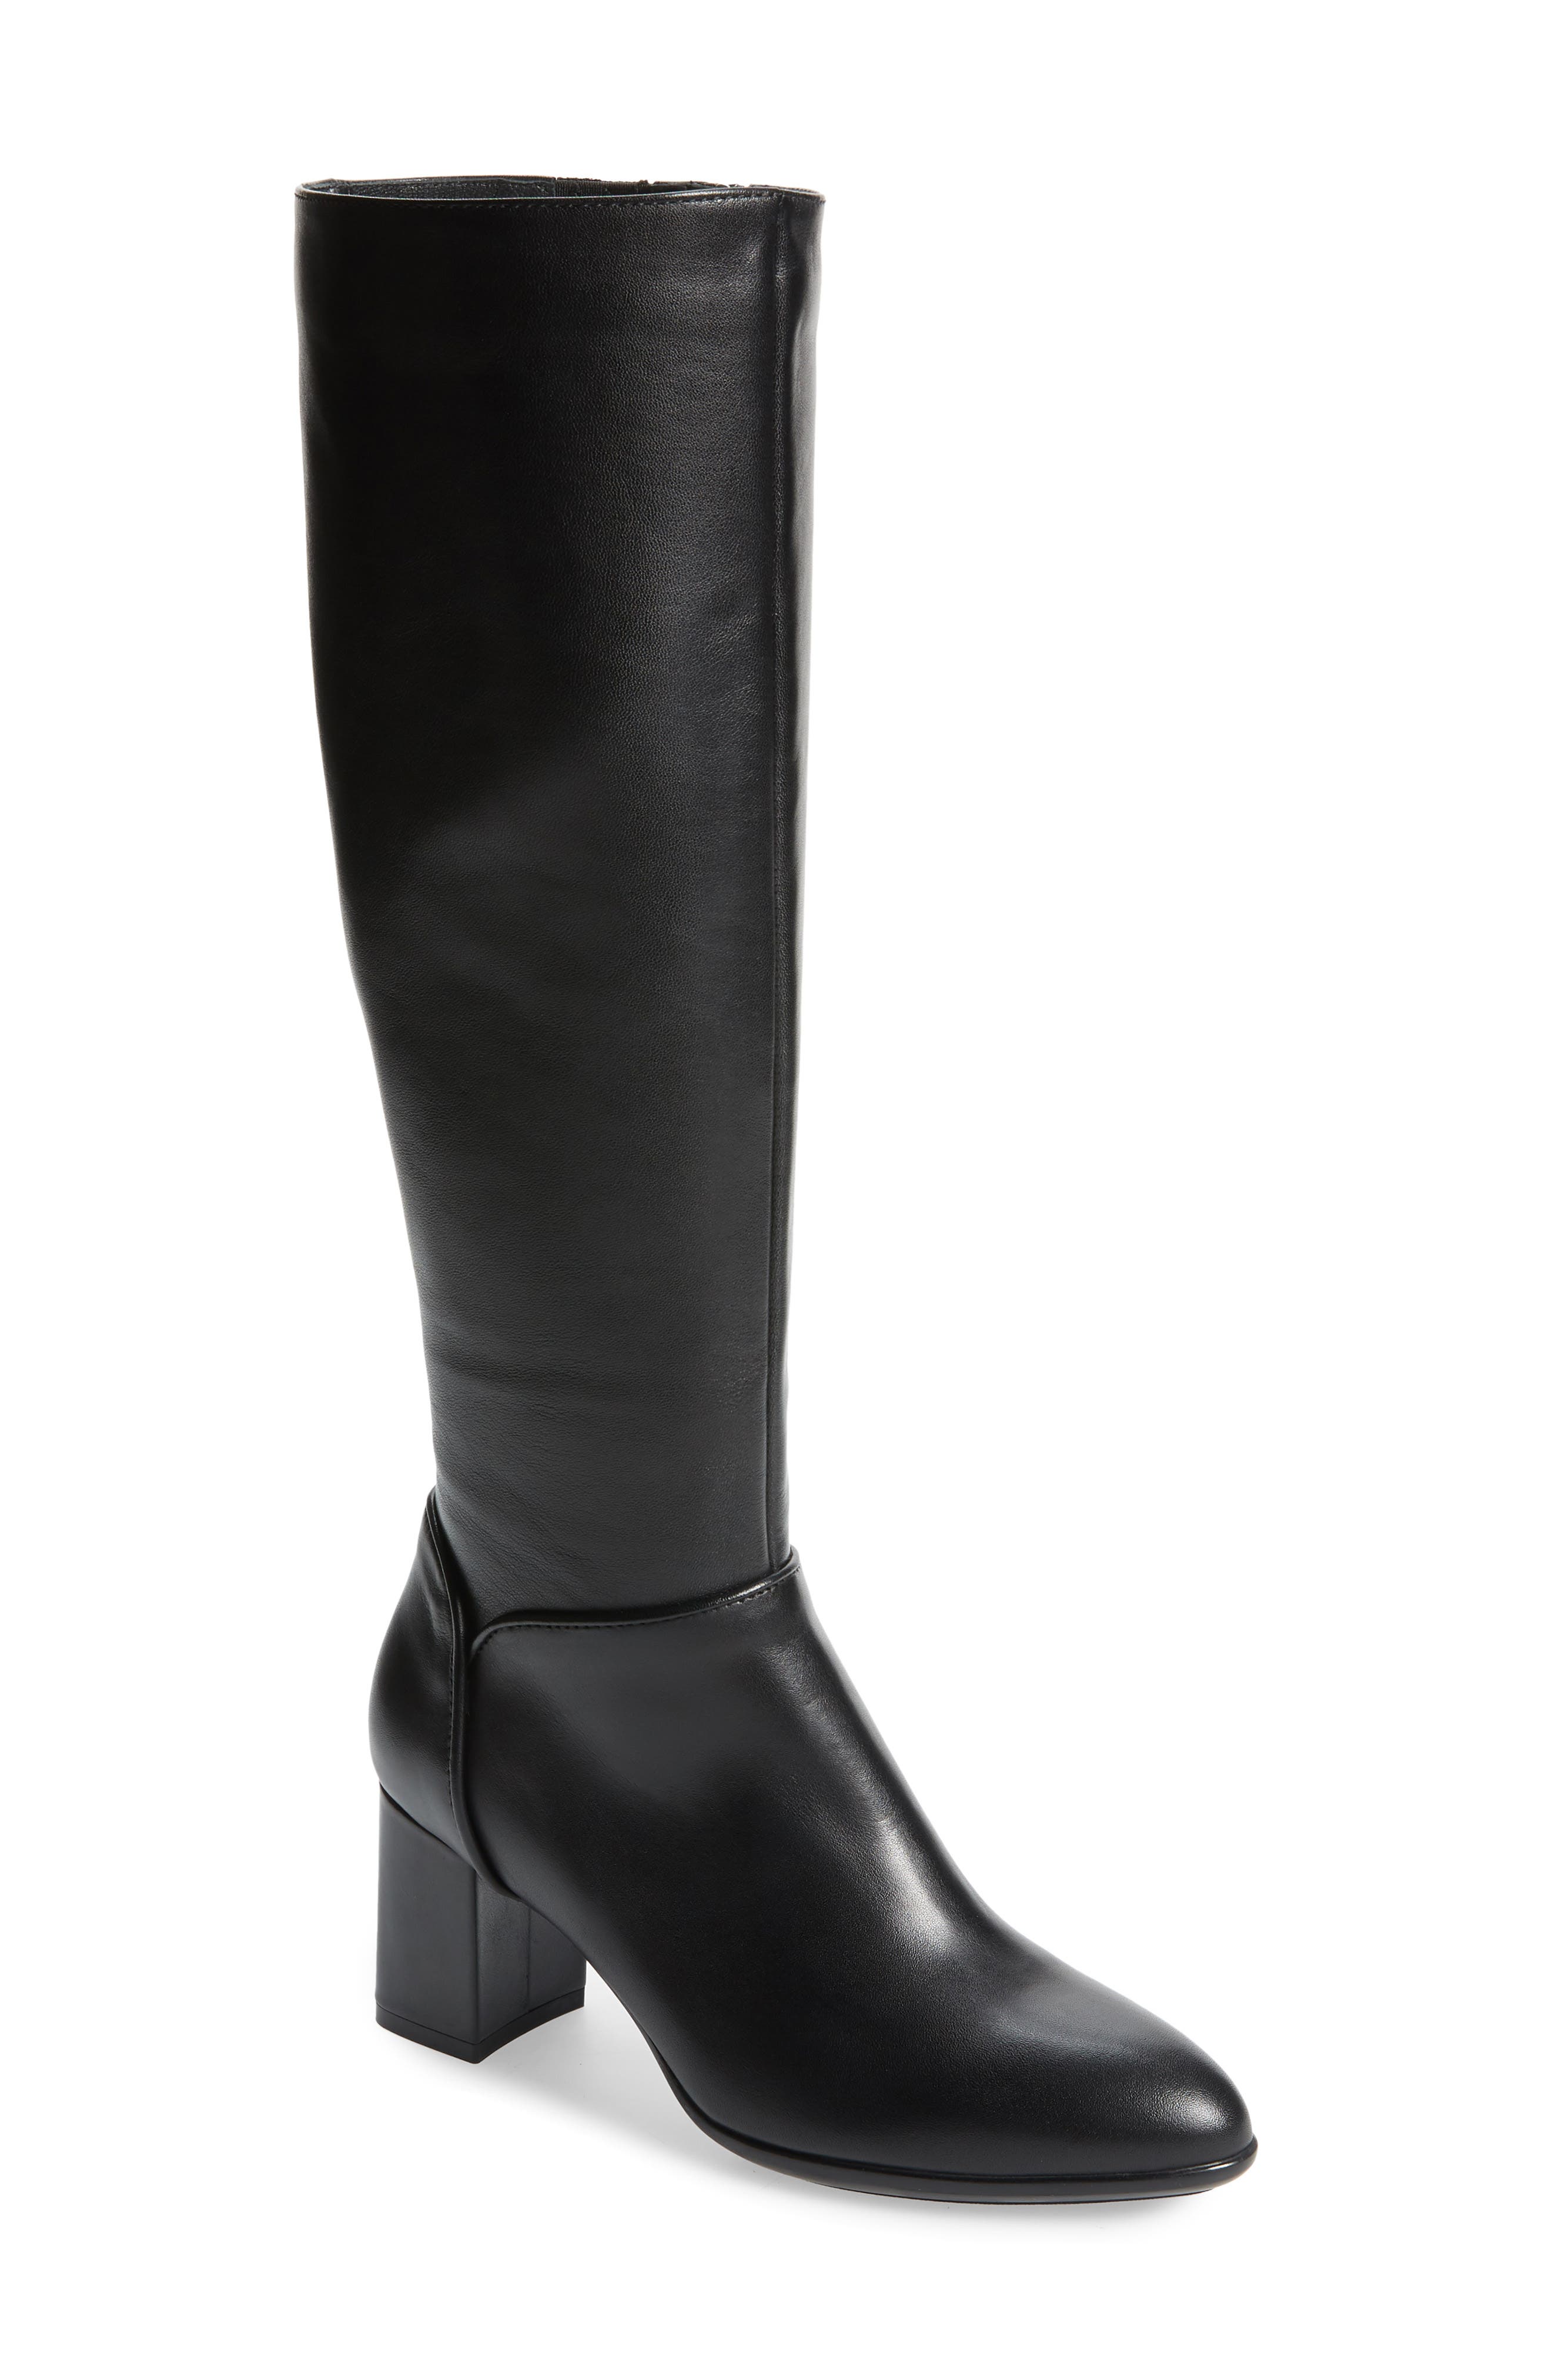 nordstrom high boots